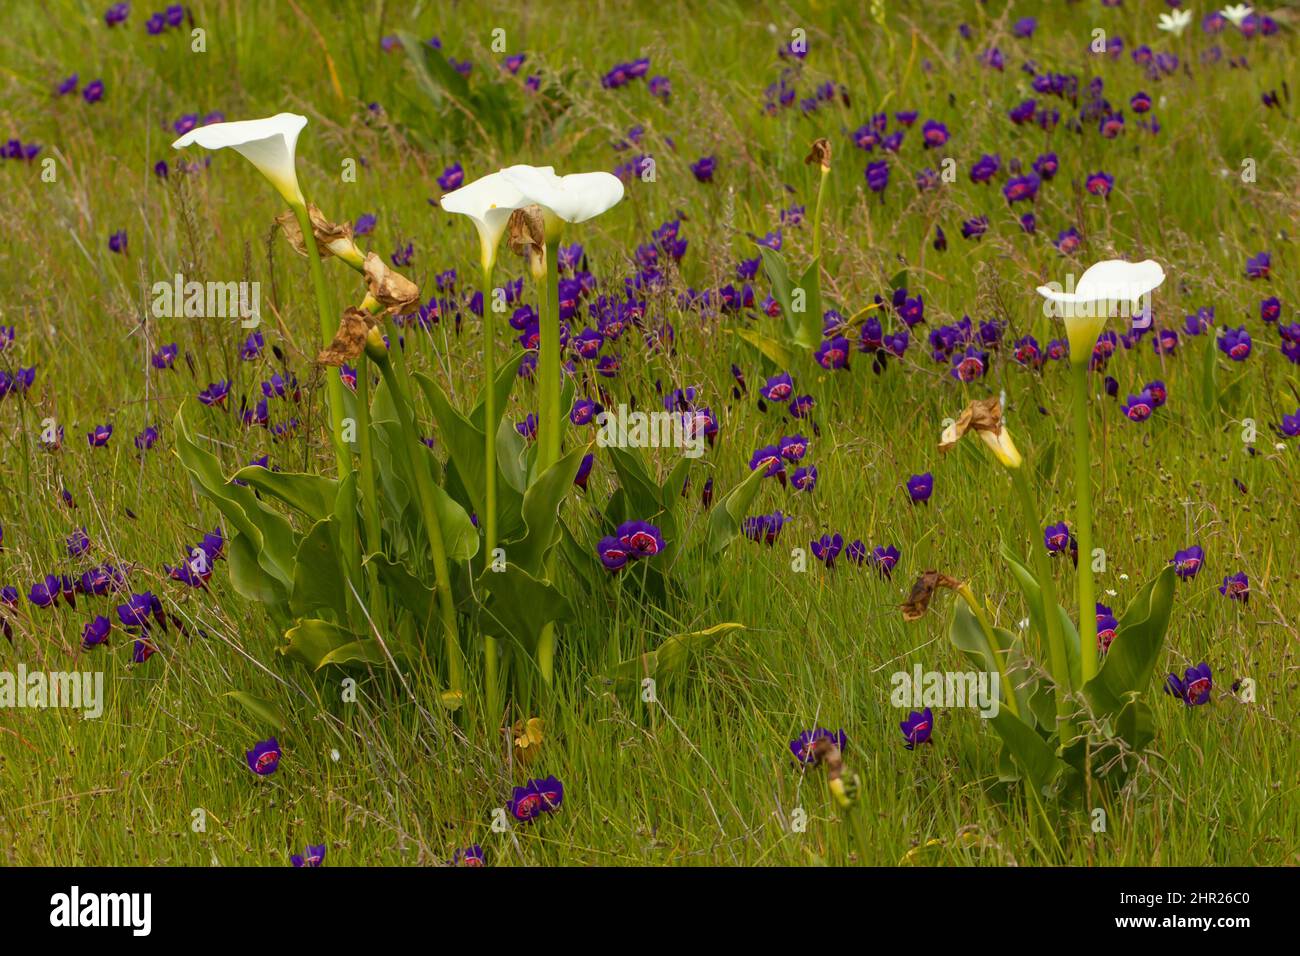 South African Wilflowers: Zantedeschia aethiopica (white flower) and Geissorhiza radians (violet flower) in habitat near Darling, South Africa Stock Photo